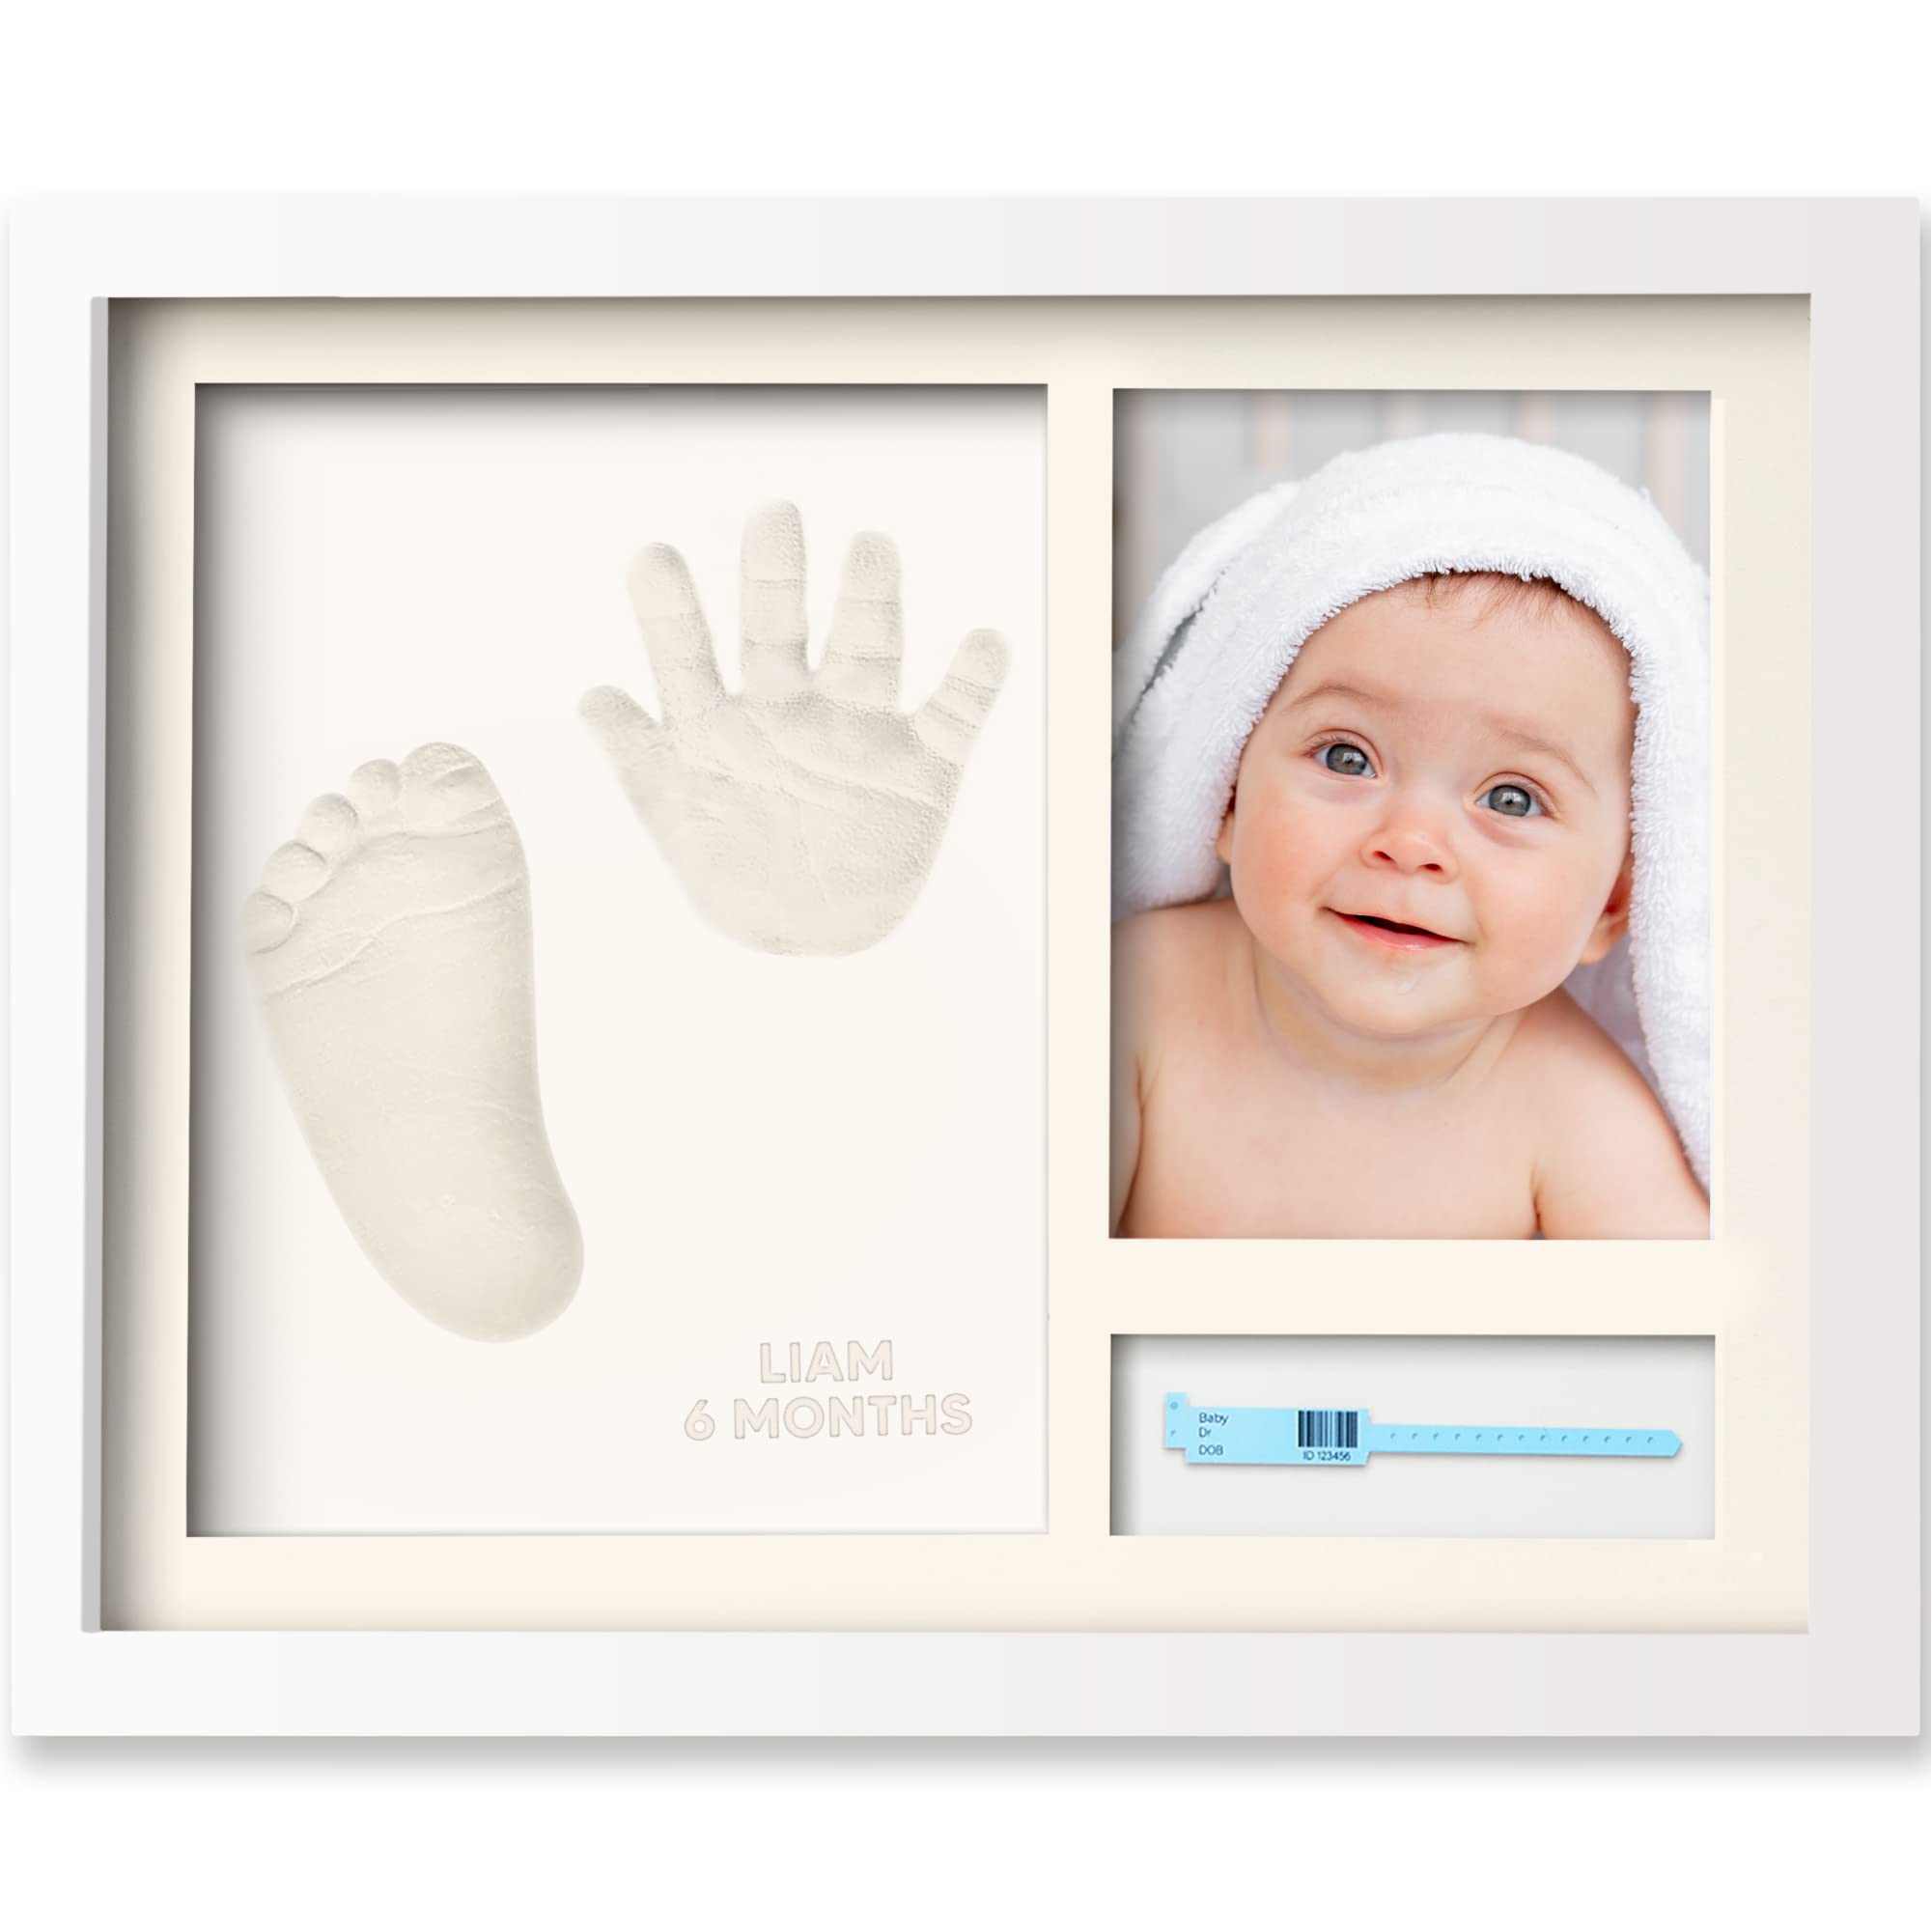 Baby Hand and Footprint Kit - Personalized Baby Footprint Kit & Handprint Kit - Baby Gift for Newborn, Boy, Girl - Baby Photo Frame Print Kit - Baby Shower Gifts - Keepsake Baby Gifts (Alpine White)